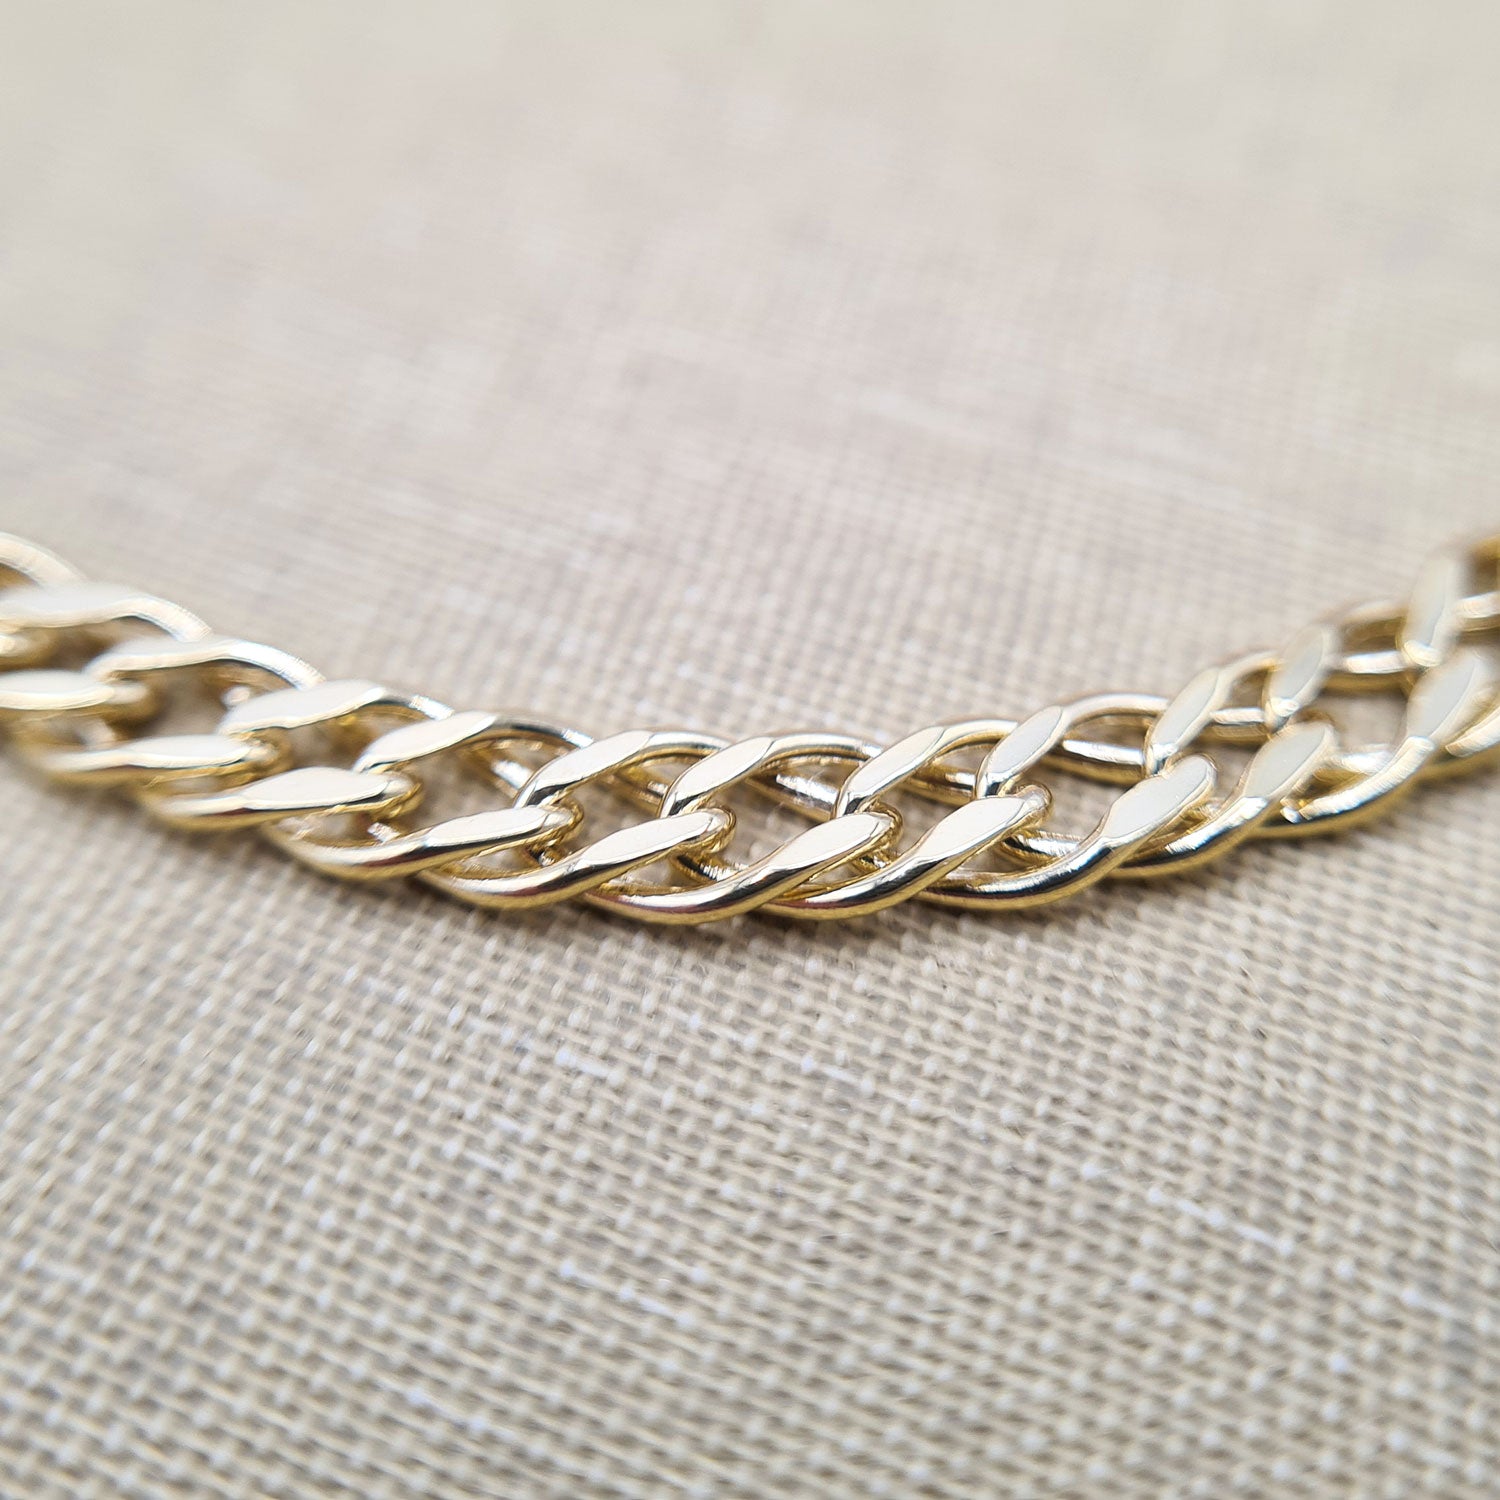 another view of the double curb links in the bracelet